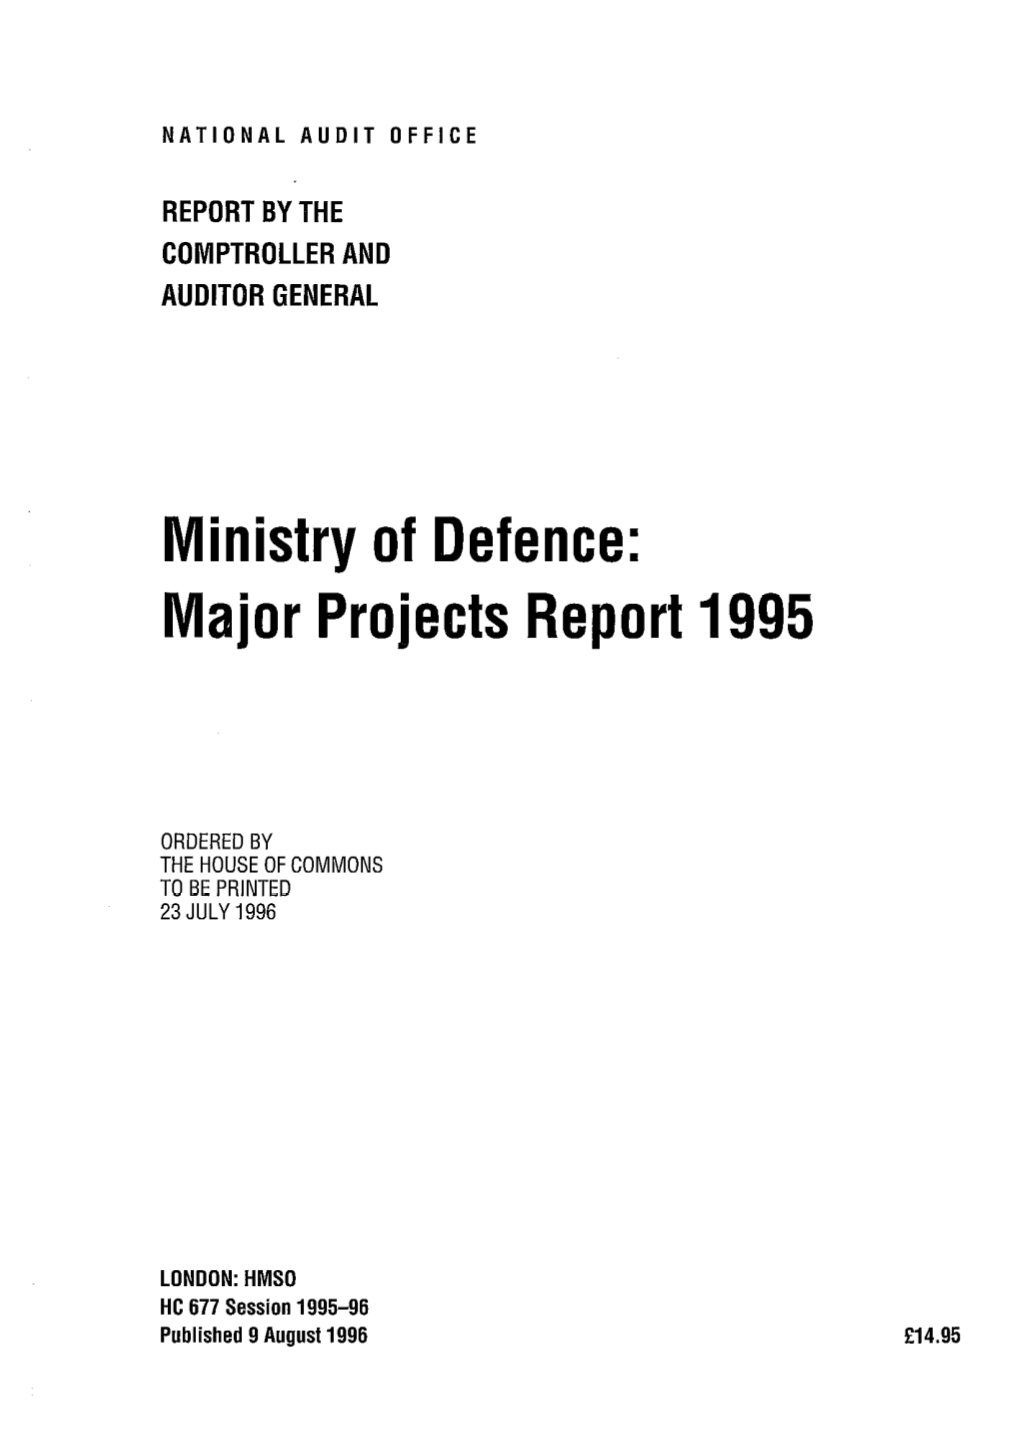 Ministry of Defence: Major Projects Report 1995